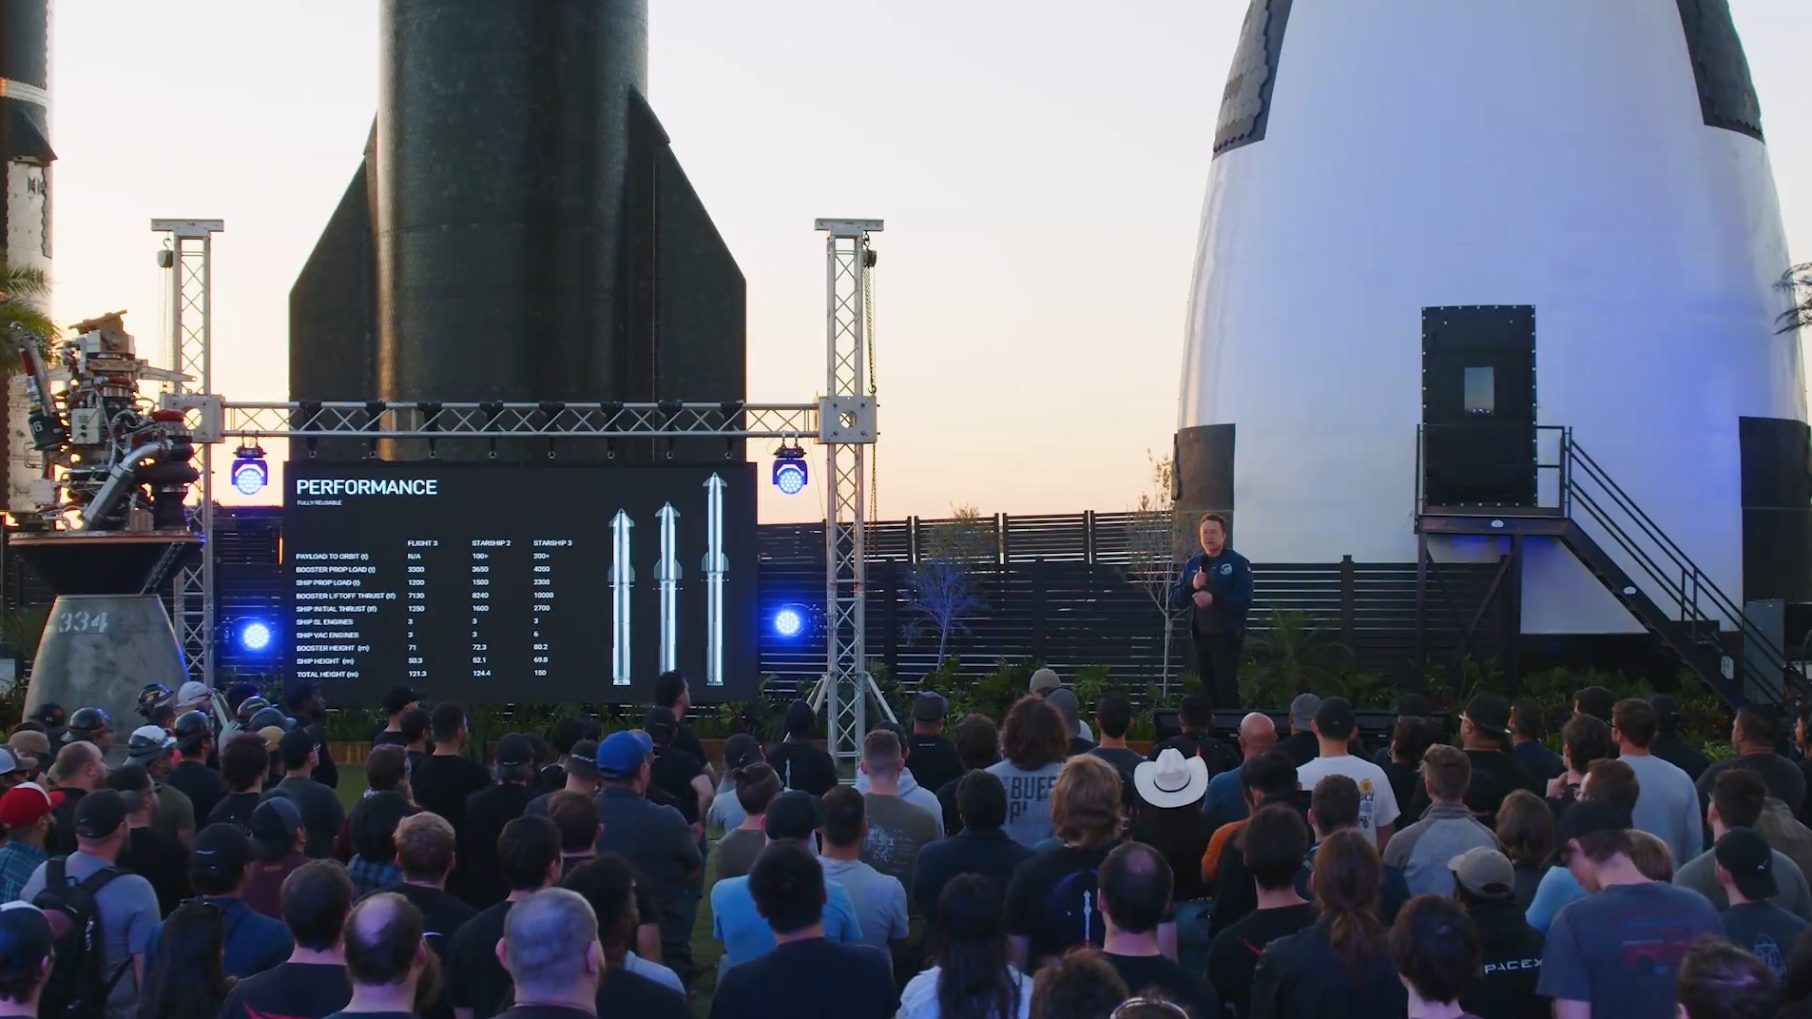 VIDEO: Elon Musk provides SpaceX Starship development update & shares plans to send Humanity to Mars